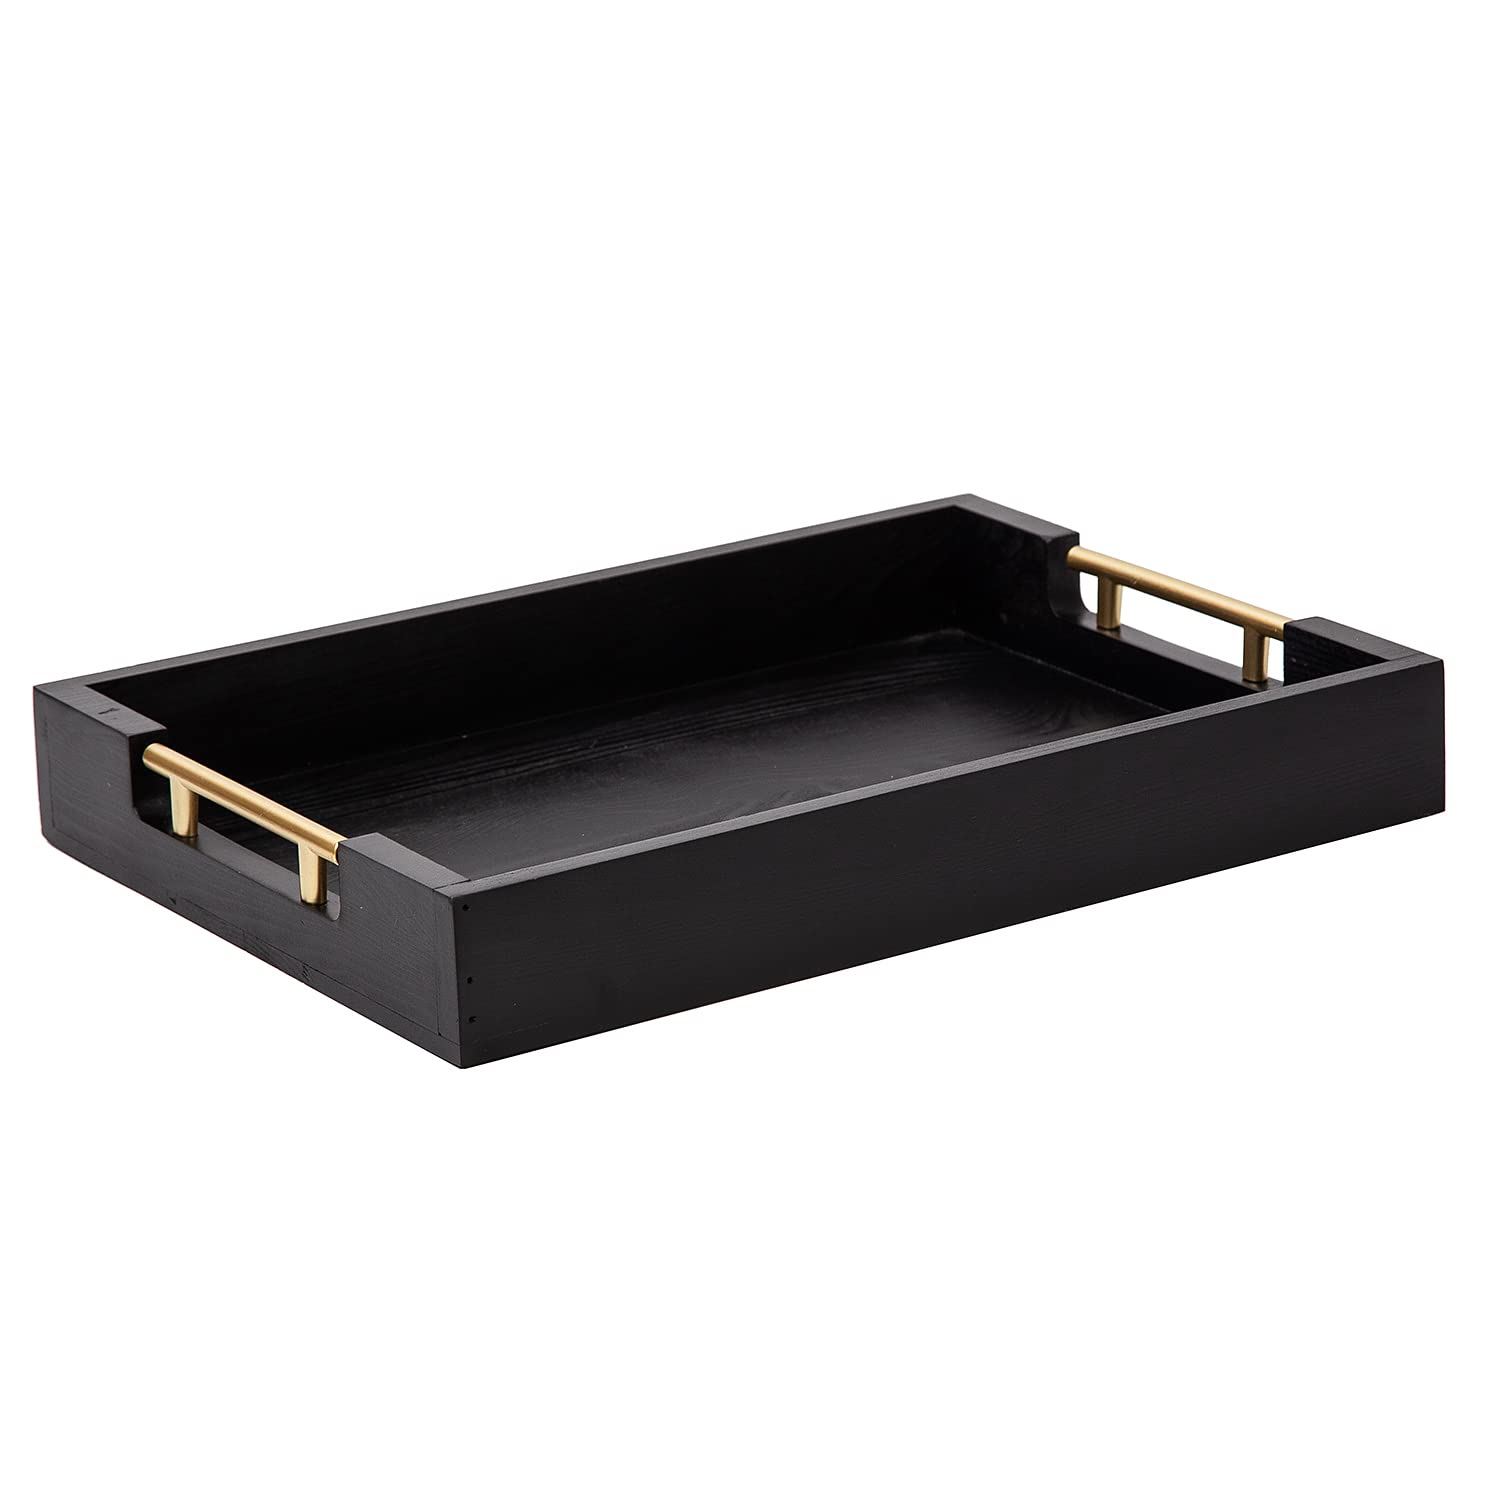 Decorative Coffee Table Ottoman Trays Modern Wood Elegant 16"x12" Rectangle Glossy Shagreen Serving Trays with Gold Metal Handles -Drinks, Liquor Serving Platter for All Occasion's(Black)